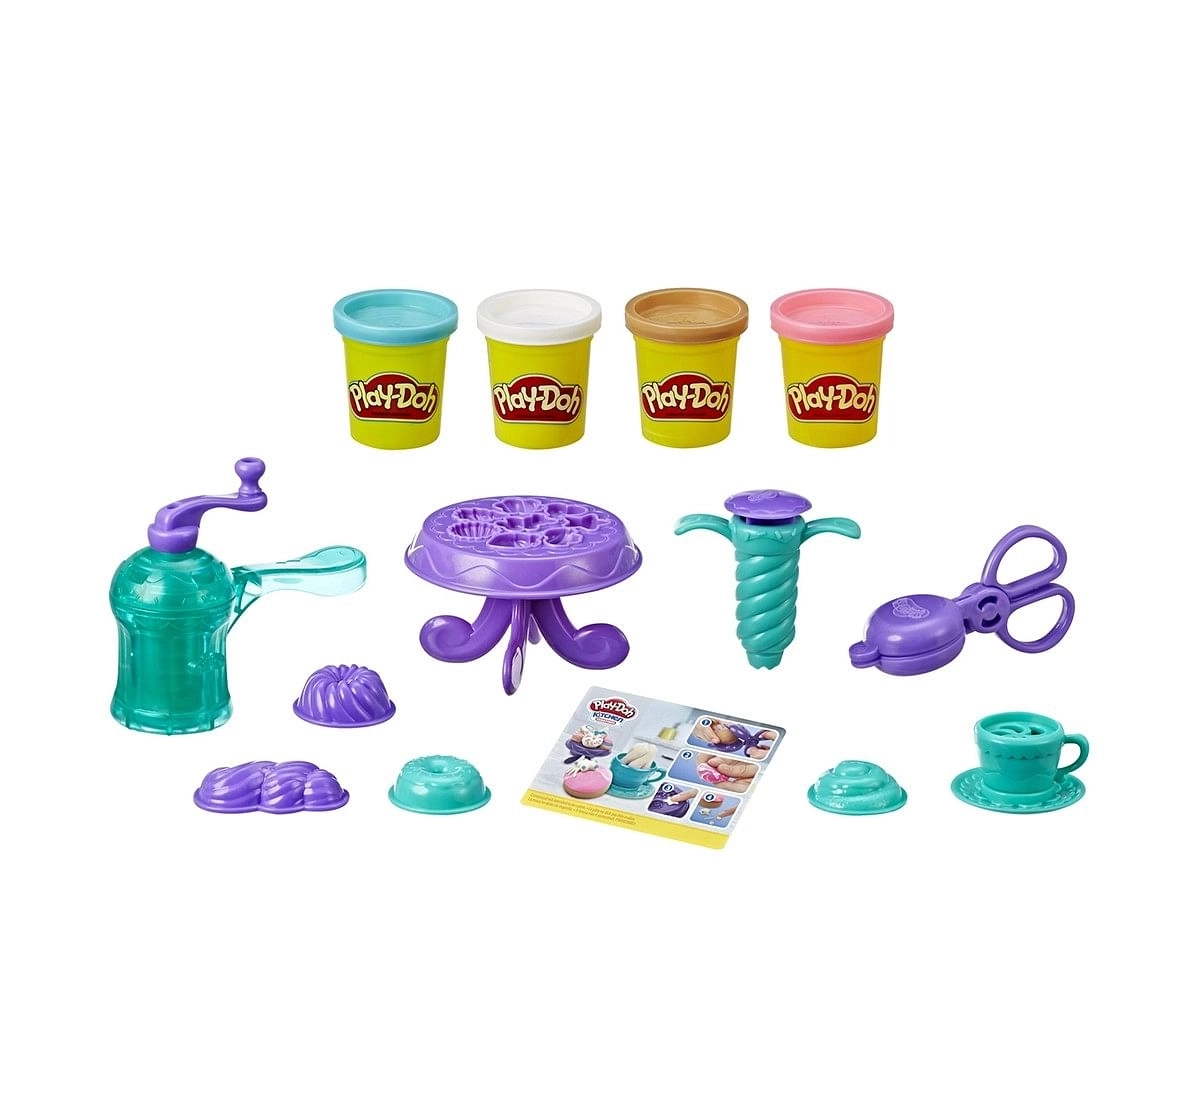 Play-Doh Kitchen Creations Delightful Donuts Set with 4 Colors Clay & Dough for Kids age 3Y+ 